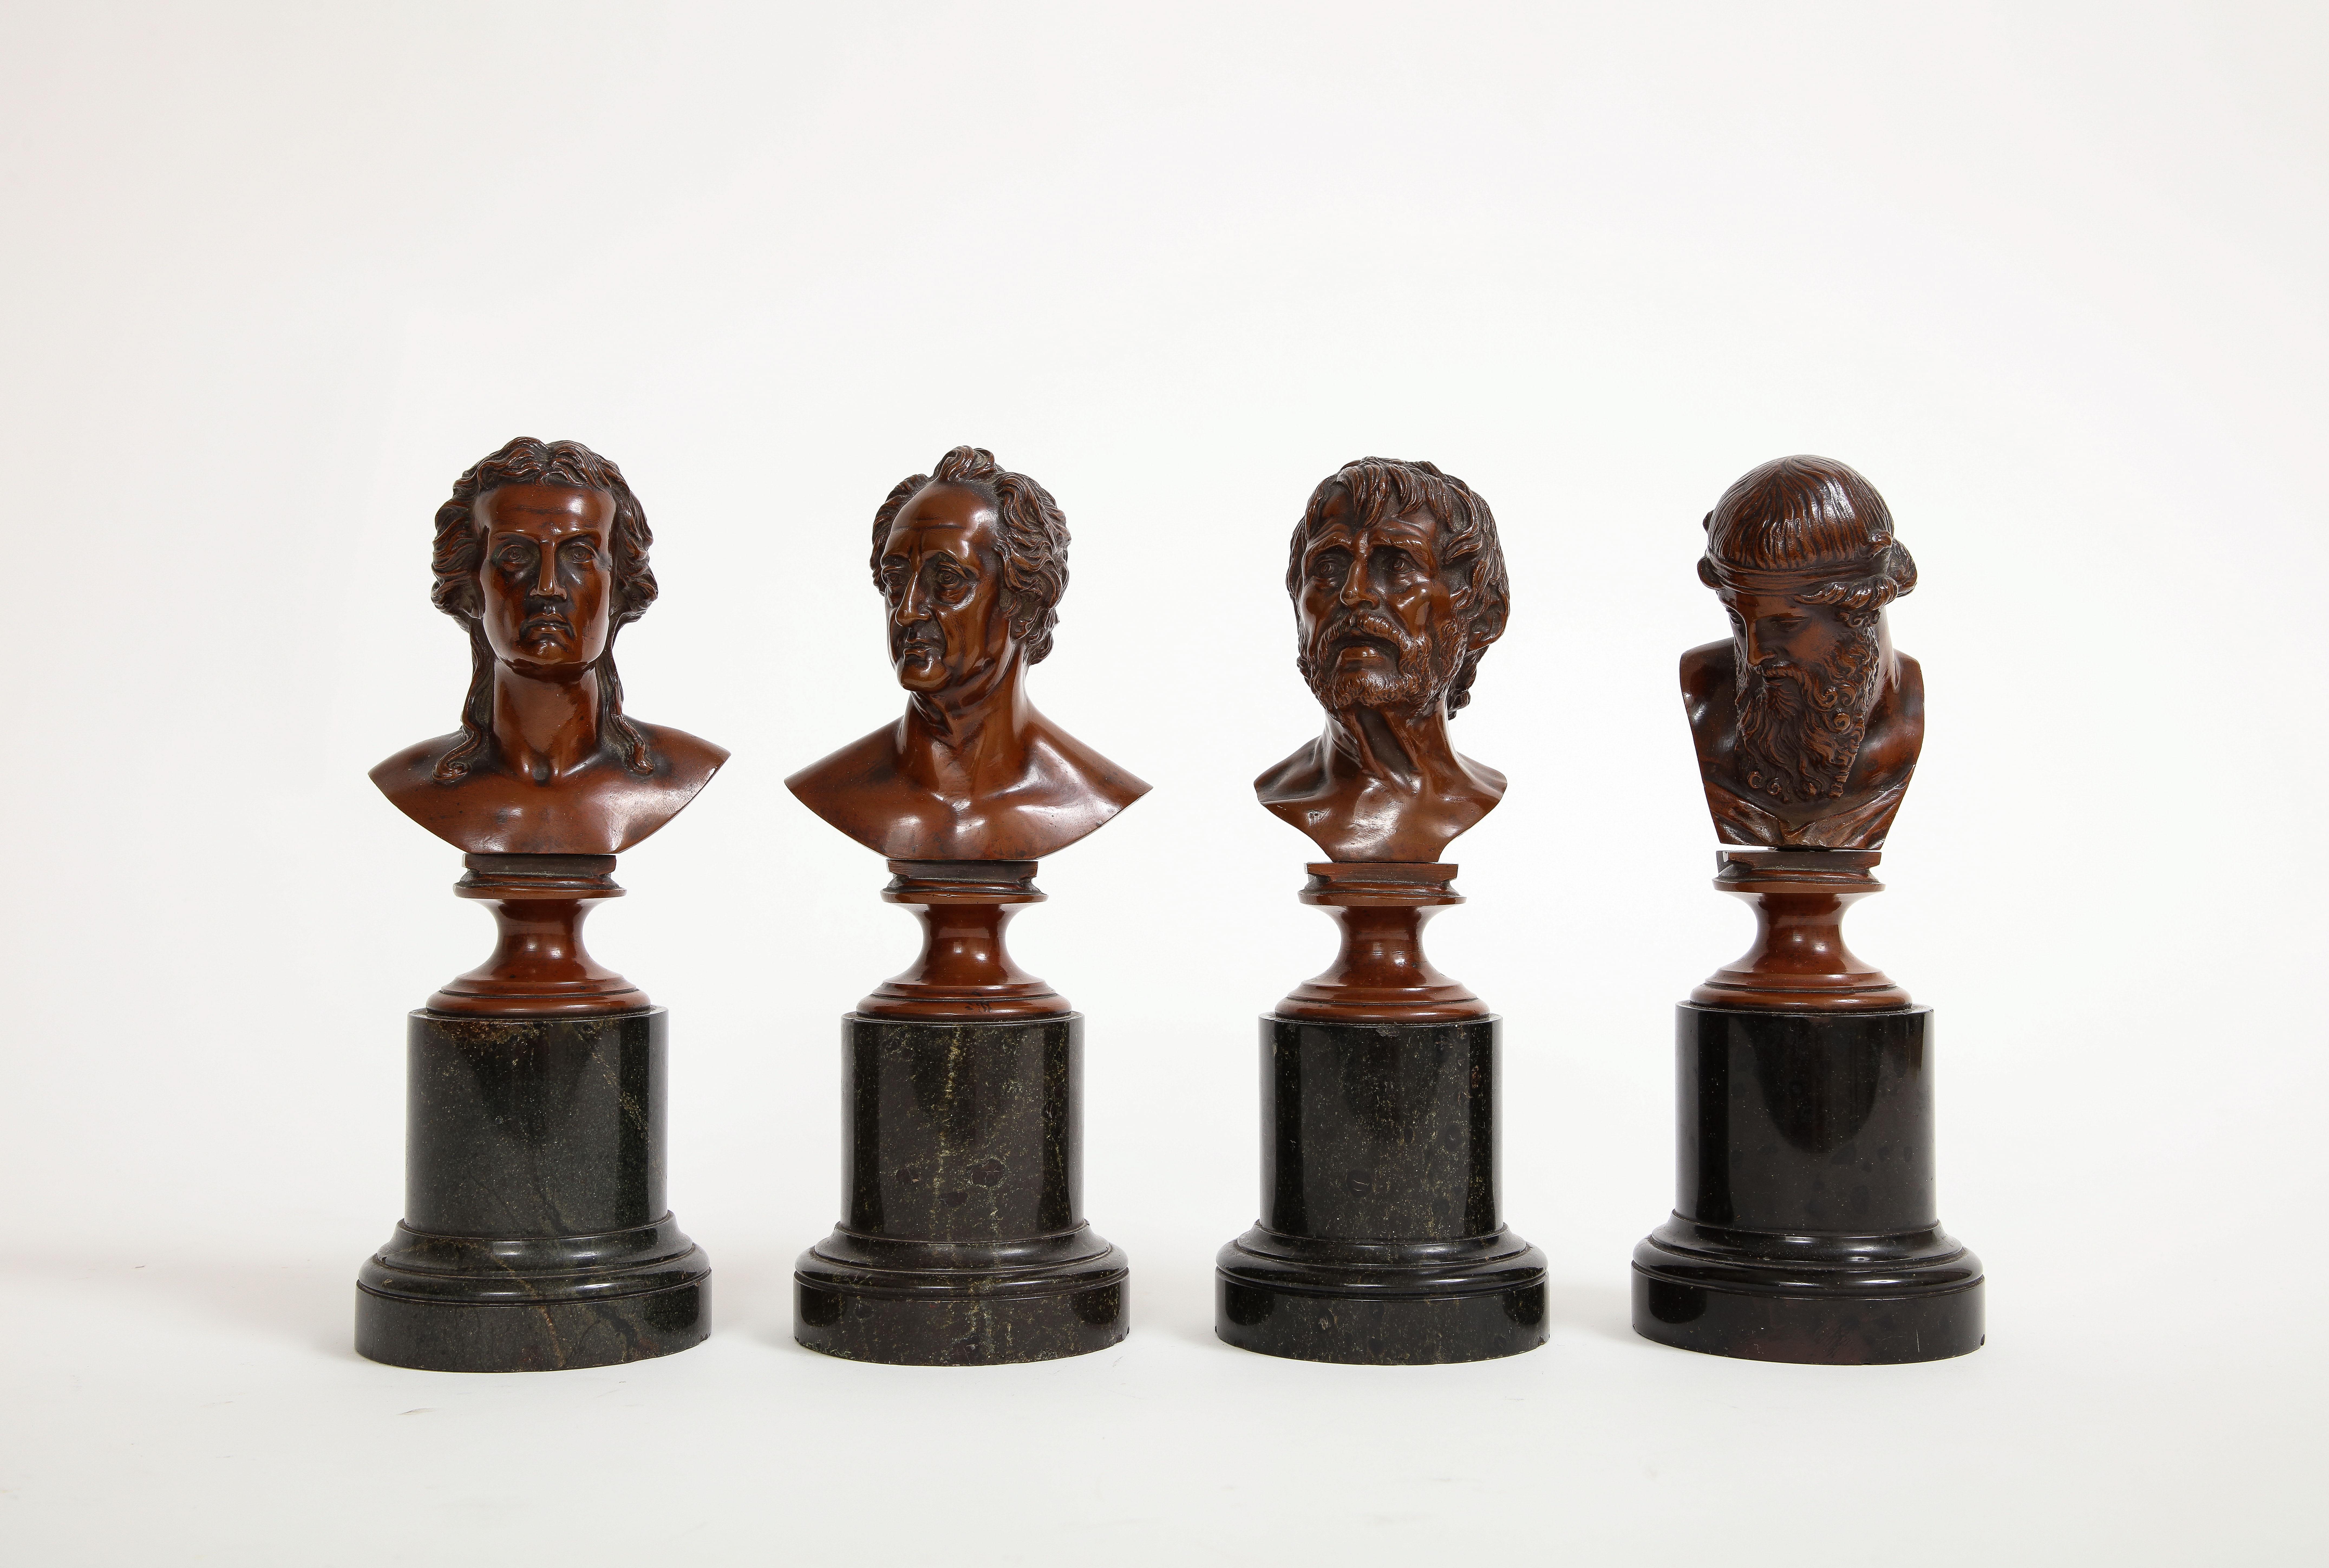 A Set of  Four 19th Century French Patinated Bronze Marble Mounted Busts of Philosophers.  The stunning patina adorning each bust accentuates the intricate facial expressions, breathing life into the features of these esteemed scholars and